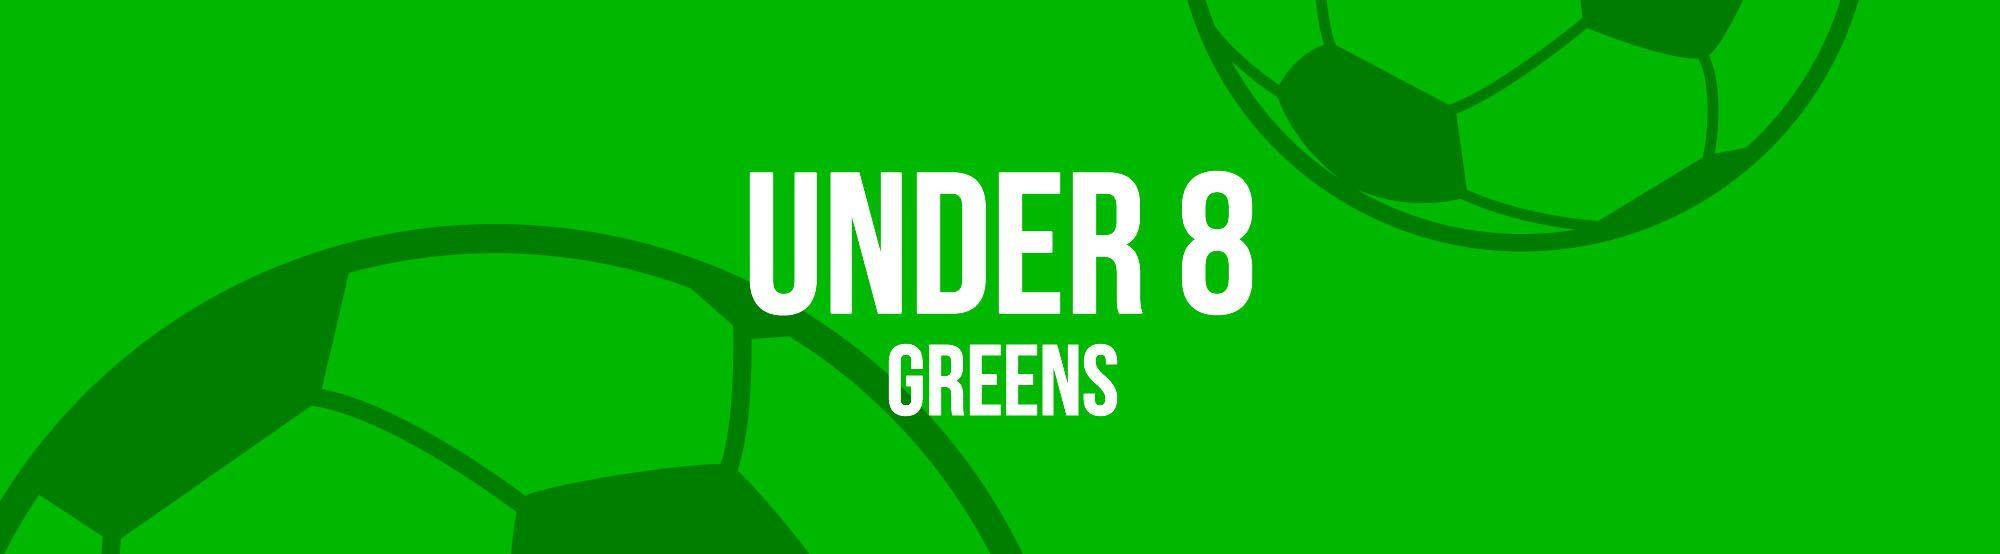 8 Green Logo - Winsor United Football Club » First friendly game for Under 8 Green